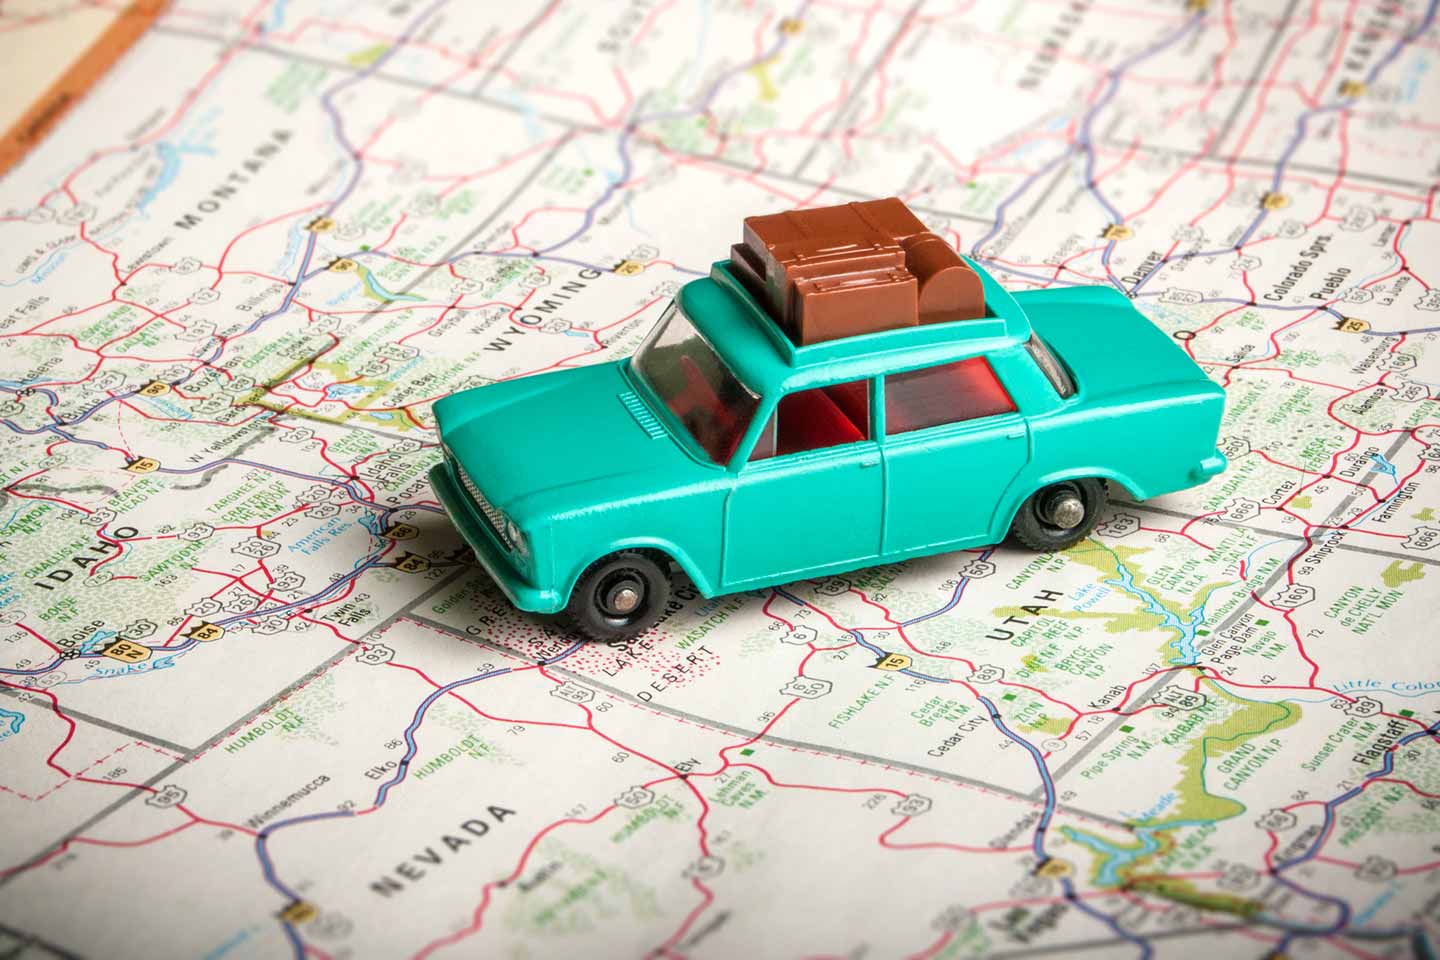 Vintage toy car with luggage on the roof with a road map of the U.S.